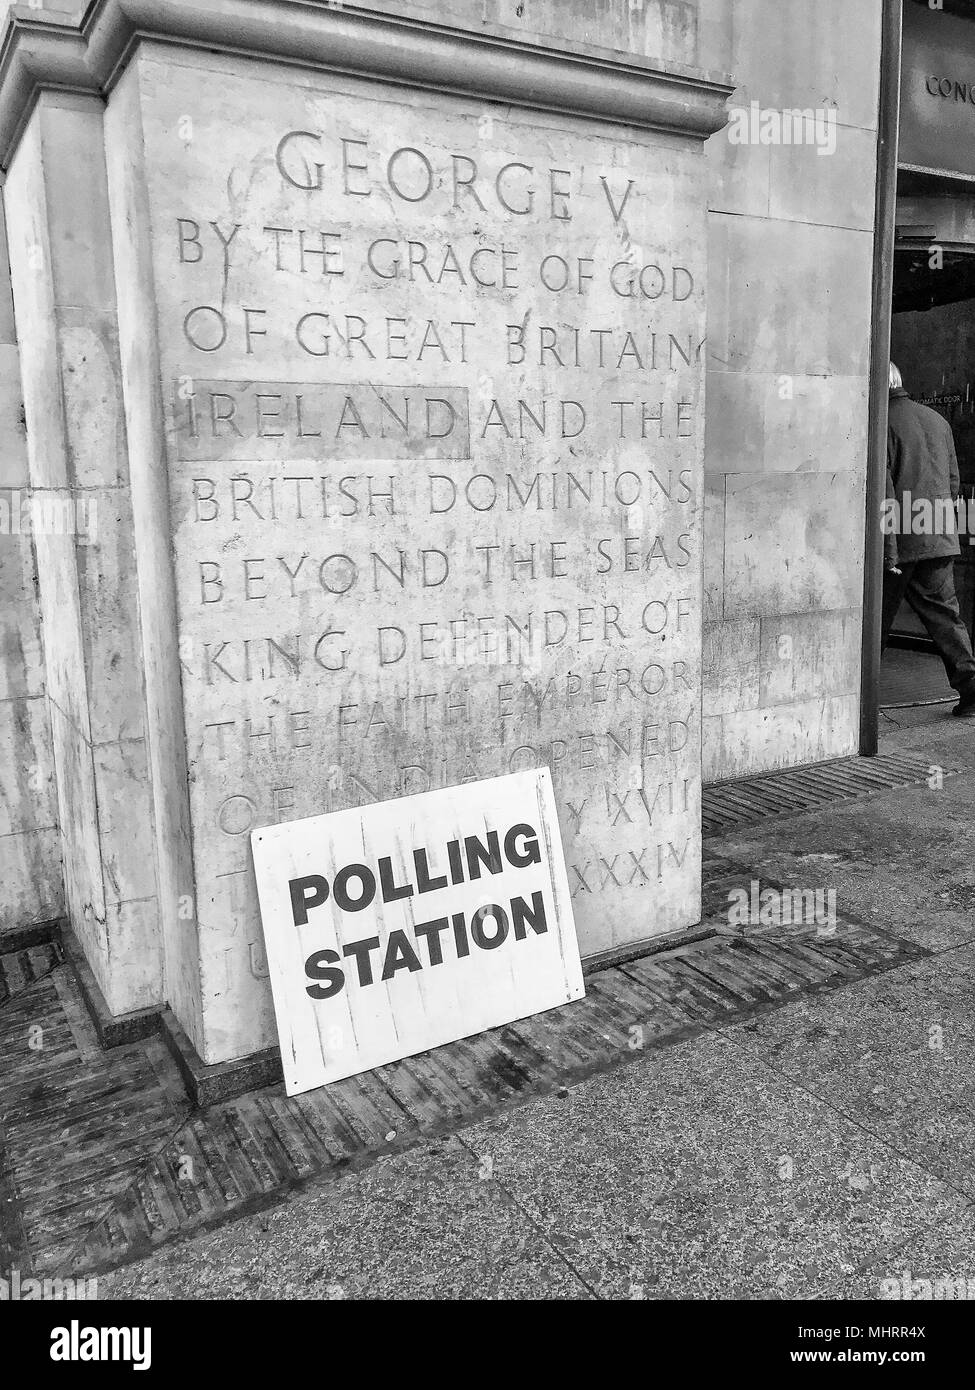 Manchester Central Library, UK. 3rd May, 2018. Polling sign in front of stone inscription at entrance to Manchester Central Library Credit: Chris Billington/Alamy Live News Stock Photo